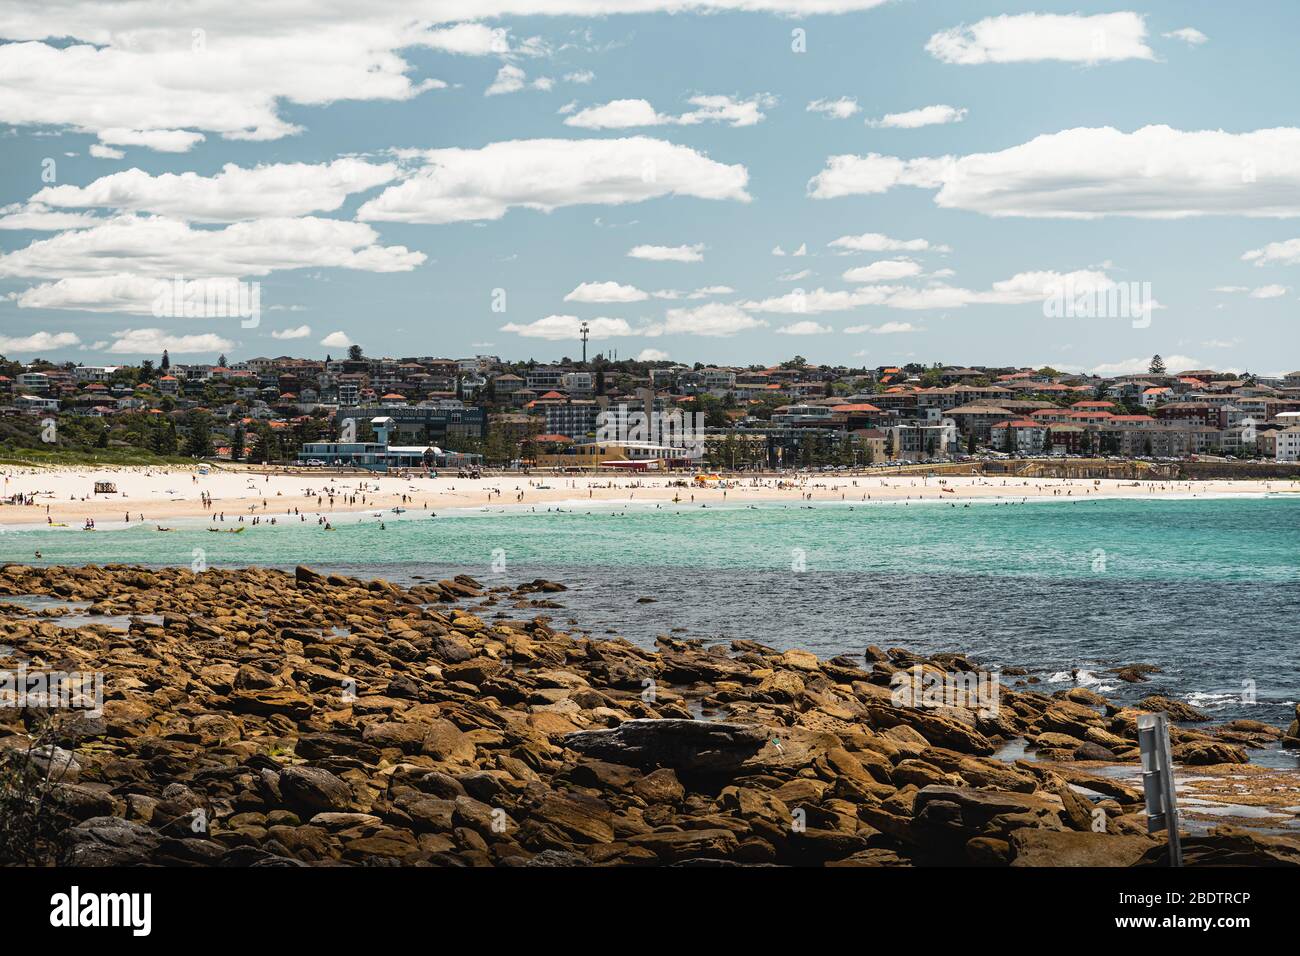 People enjoying Maroubra Beach on a bright summers day, as seen from the start of the Malabar Headland National Park Coastal Walk. Stock Photo